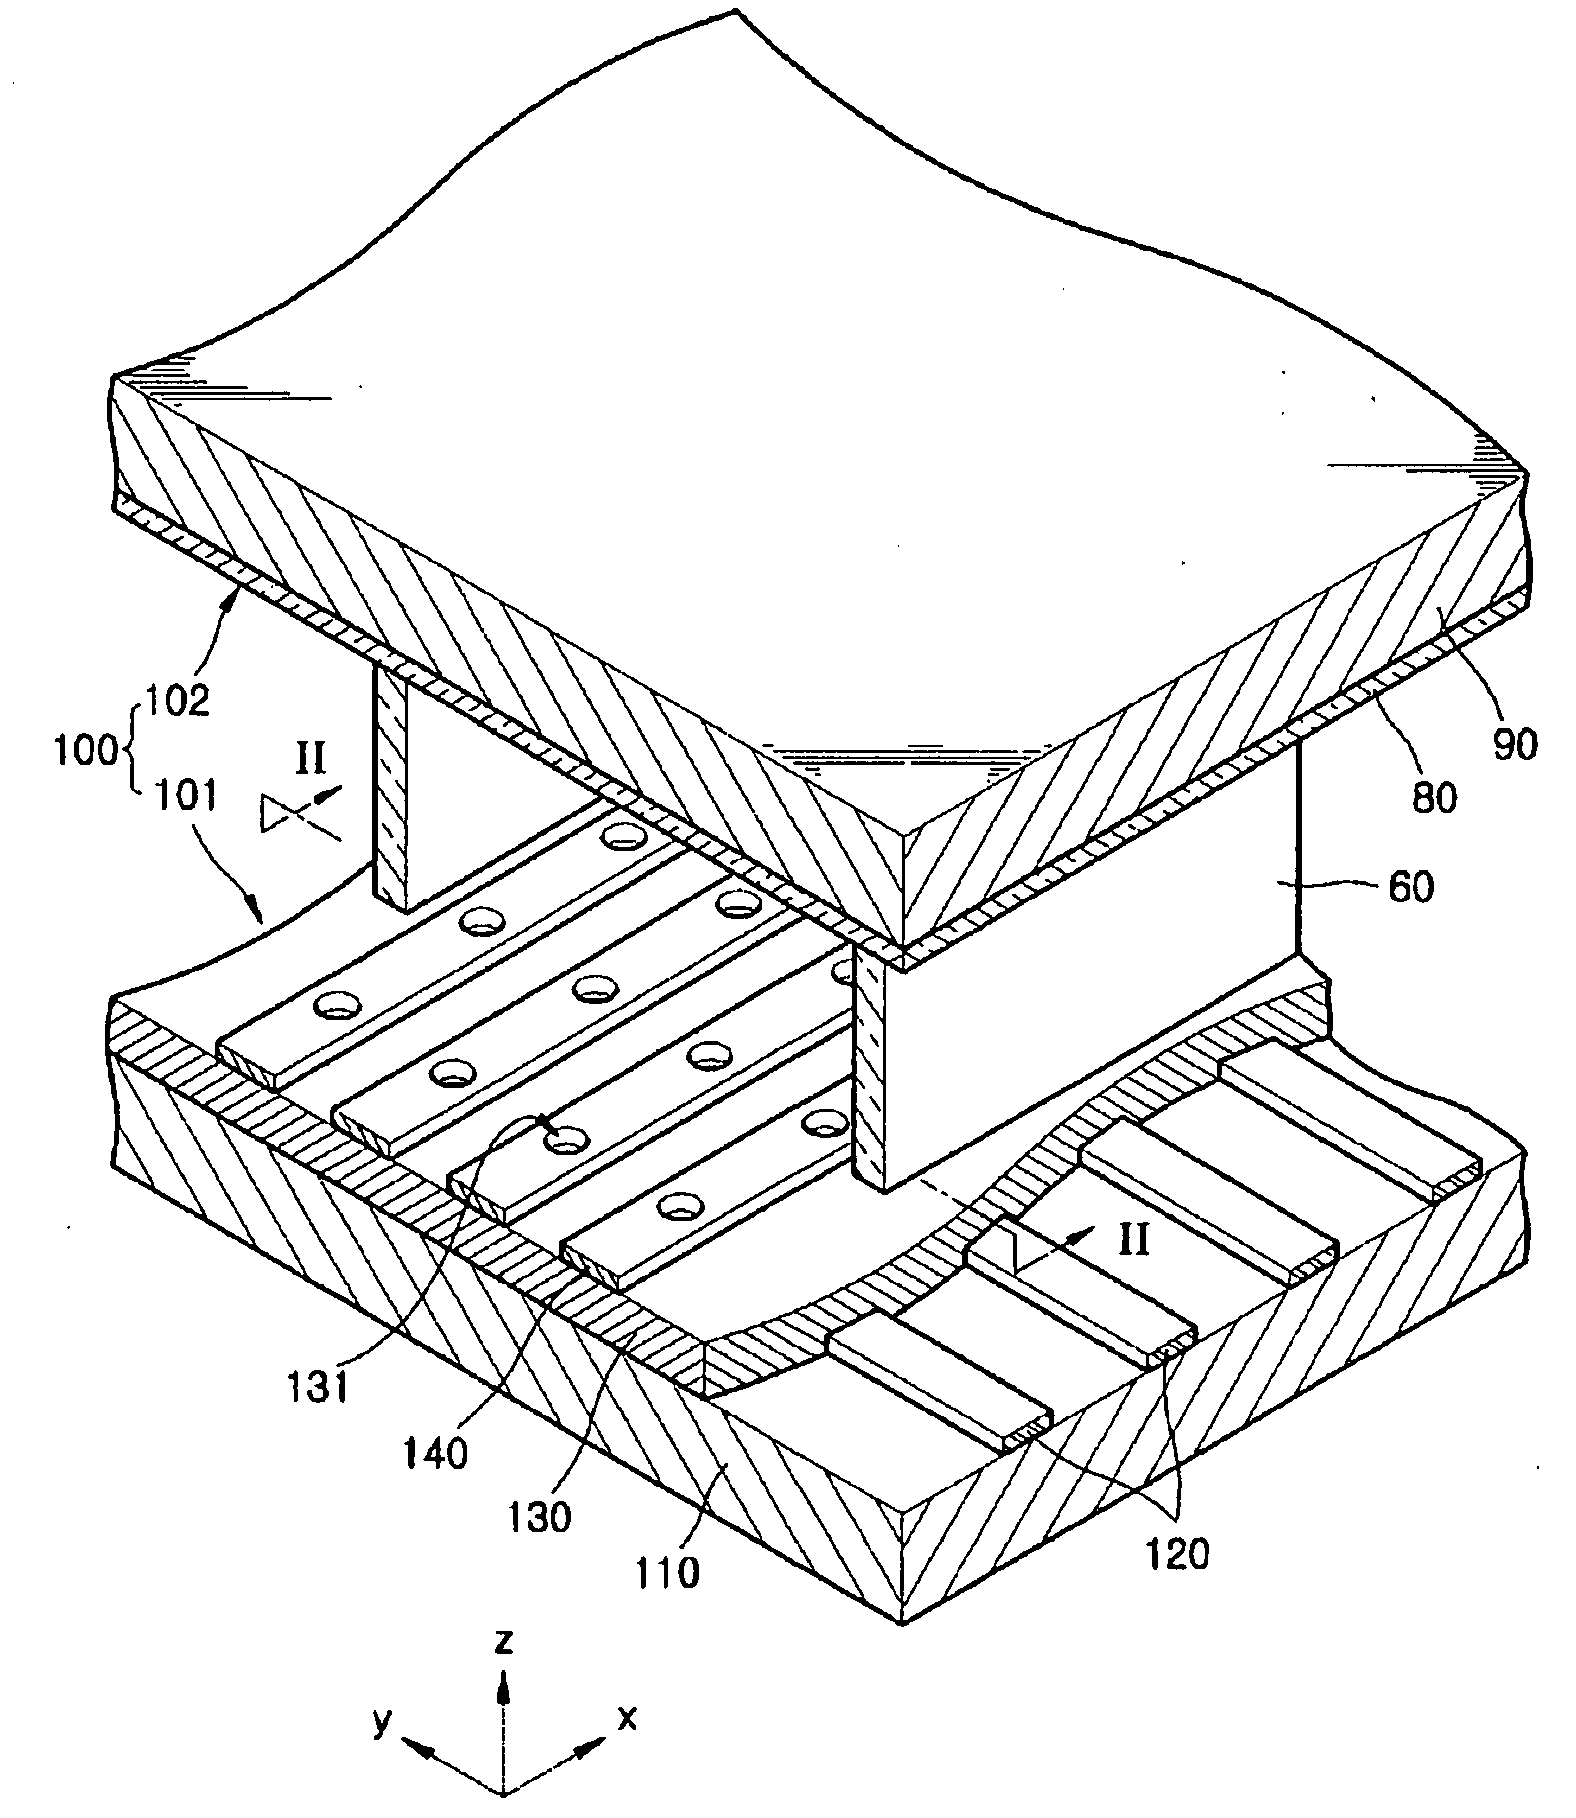 Carbon-based material for electron emission source, electron emission source containing the carbon-based material, electron emission device including the electron emission source, and method of preparing electron emission source